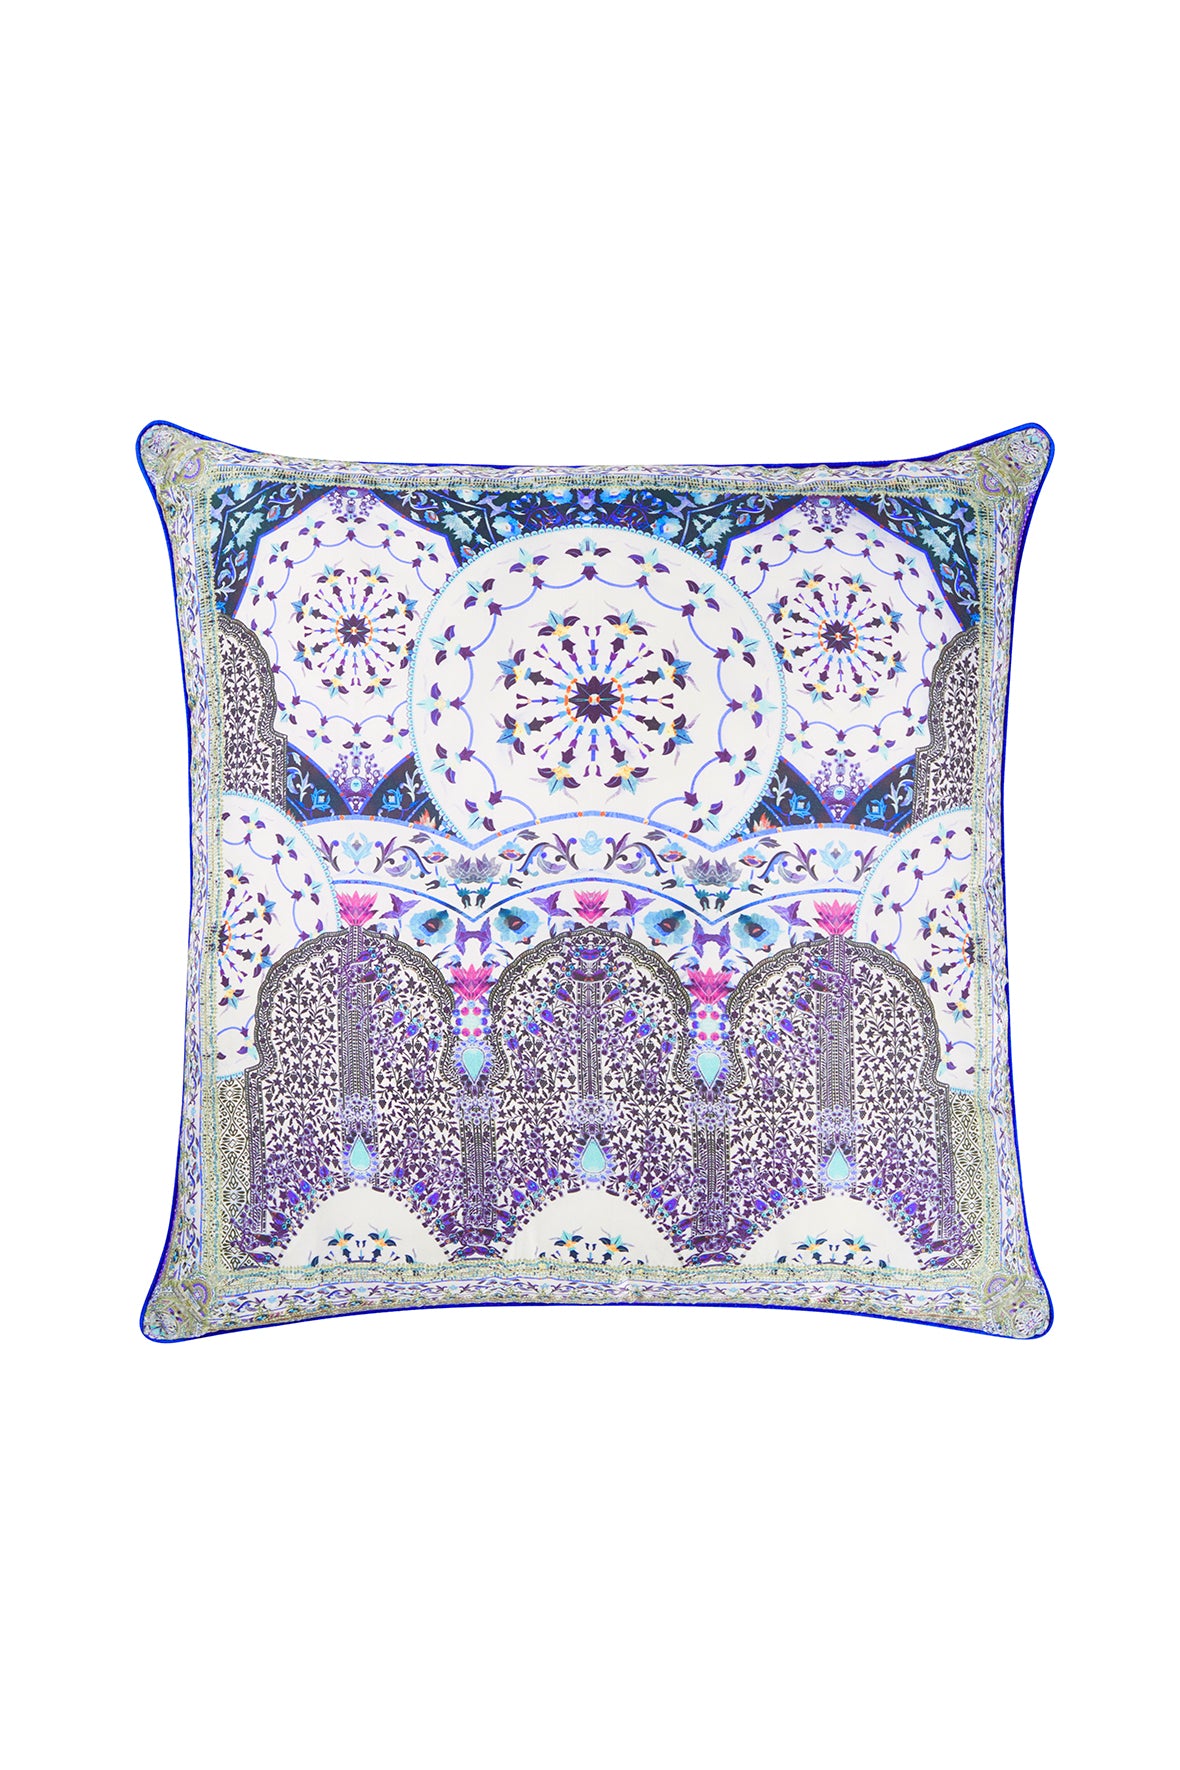 STRENGTH IN RAYS LARGE SQUARE CUSHION